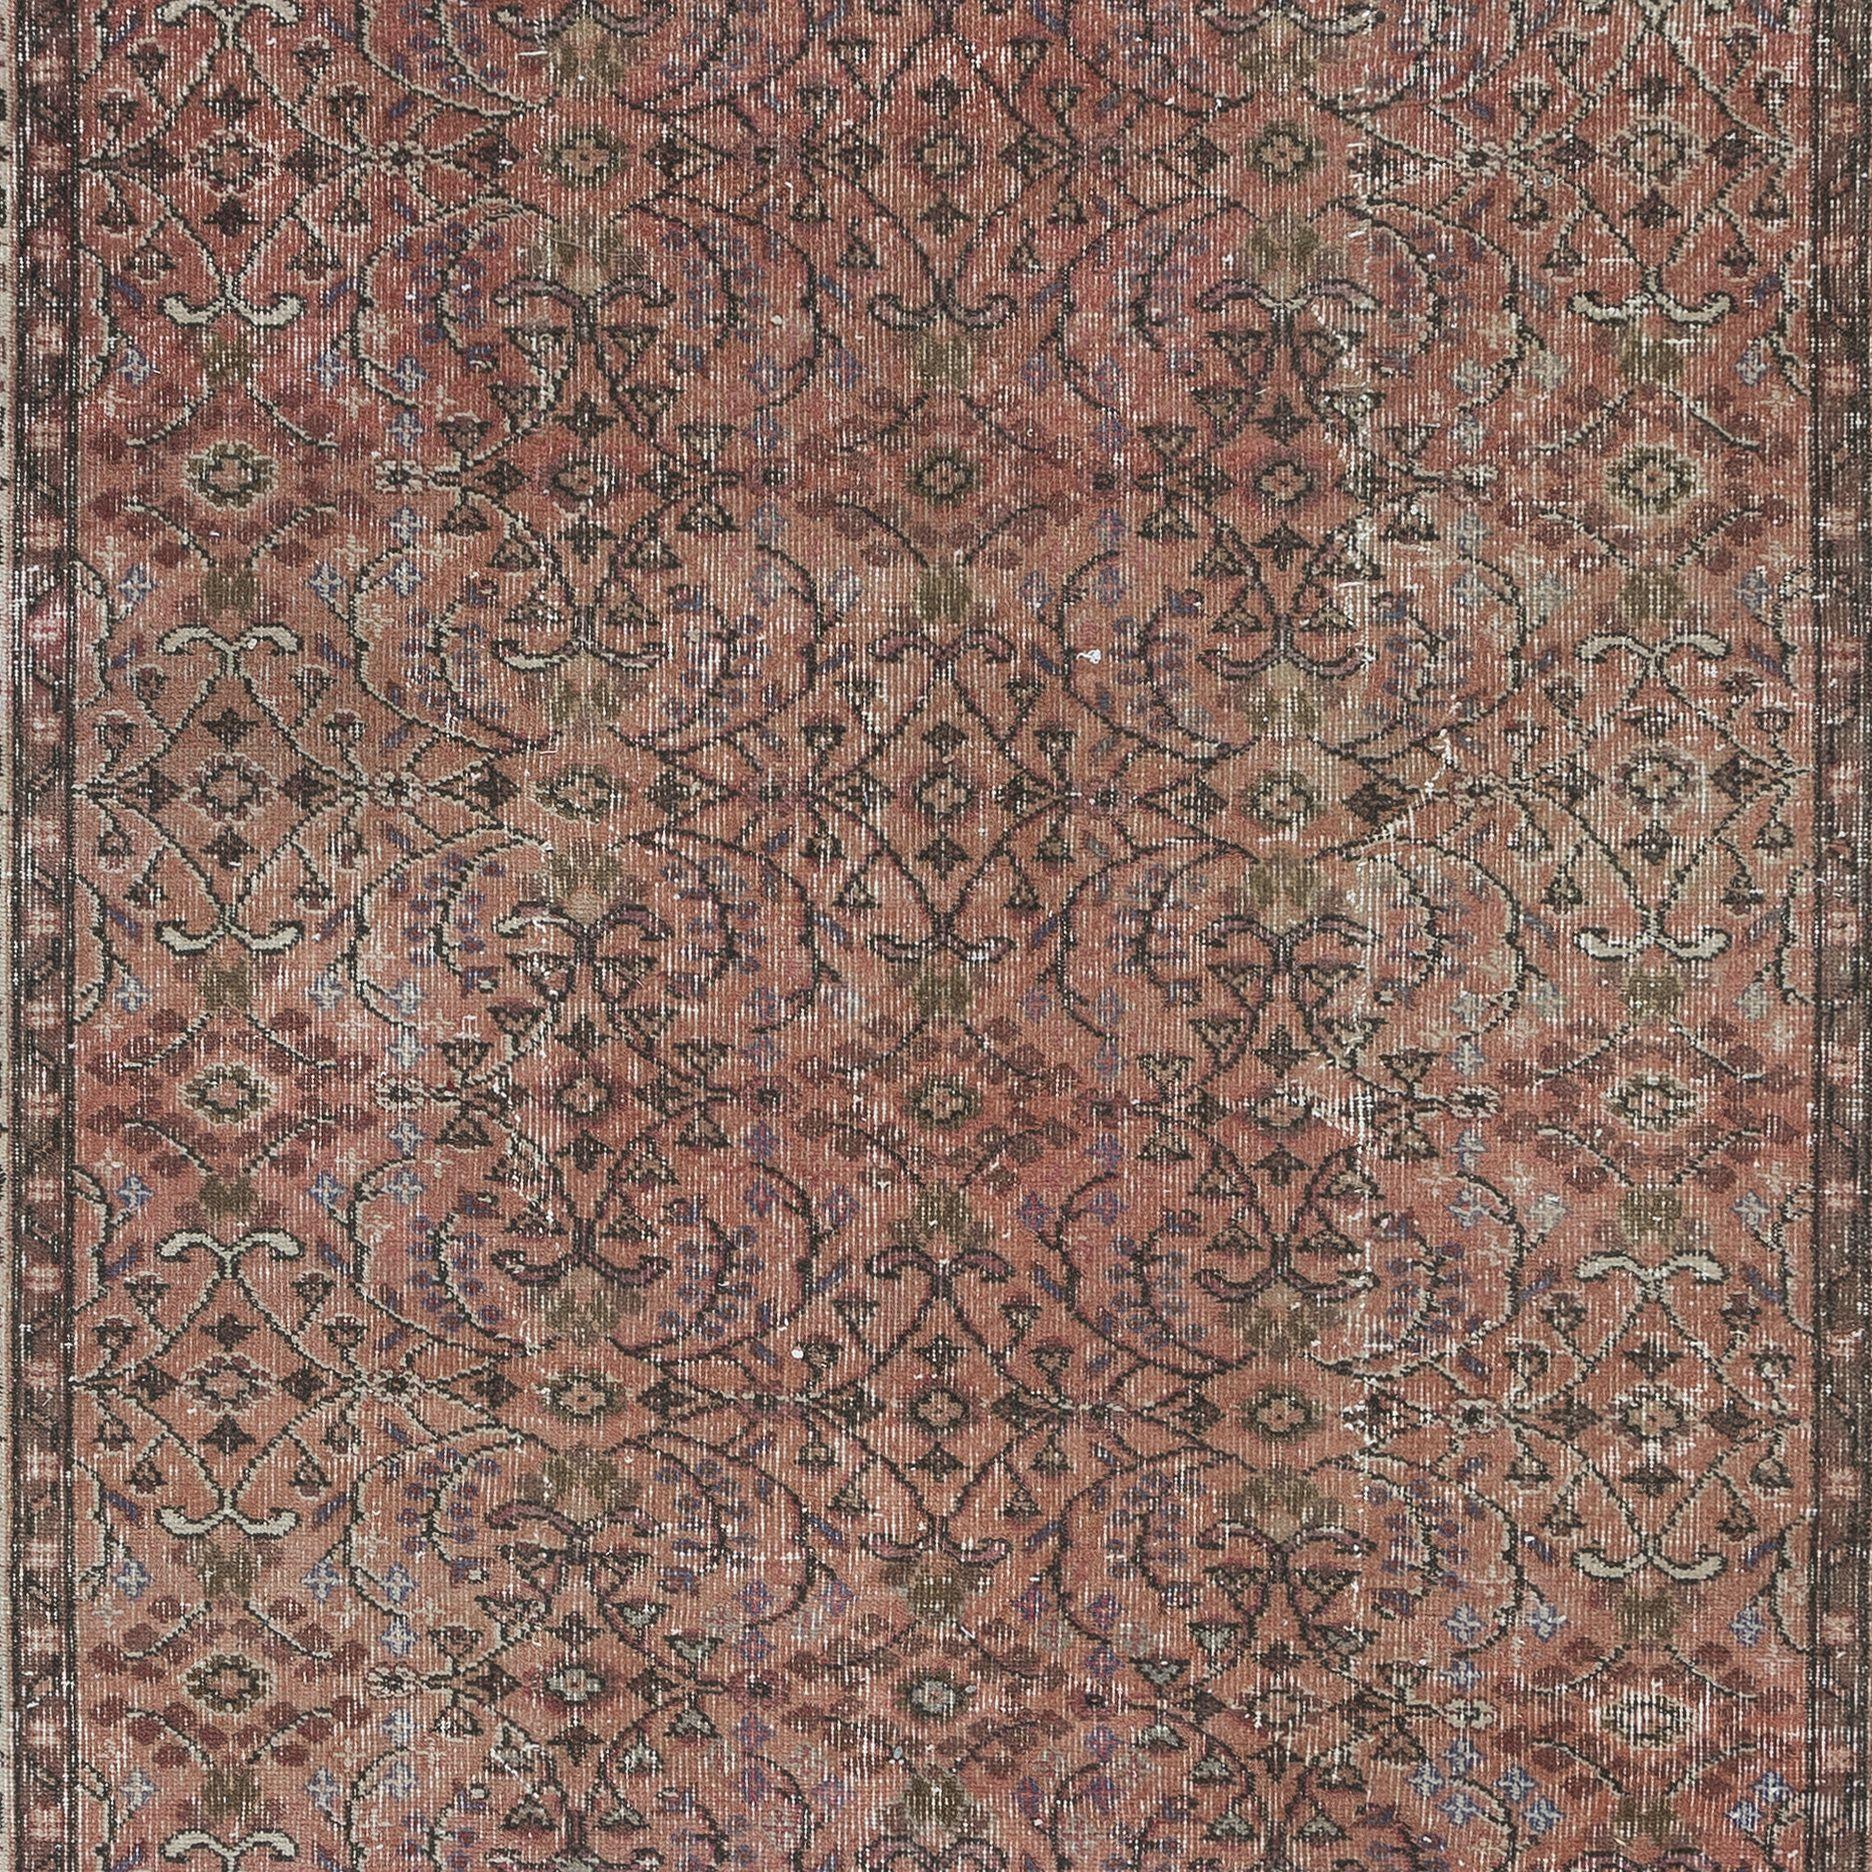 5.4x8.8 Ft Vintage Turkish Area Rug in Red & Beige, Hand Knotted Floral Carpet In Good Condition For Sale In Philadelphia, PA